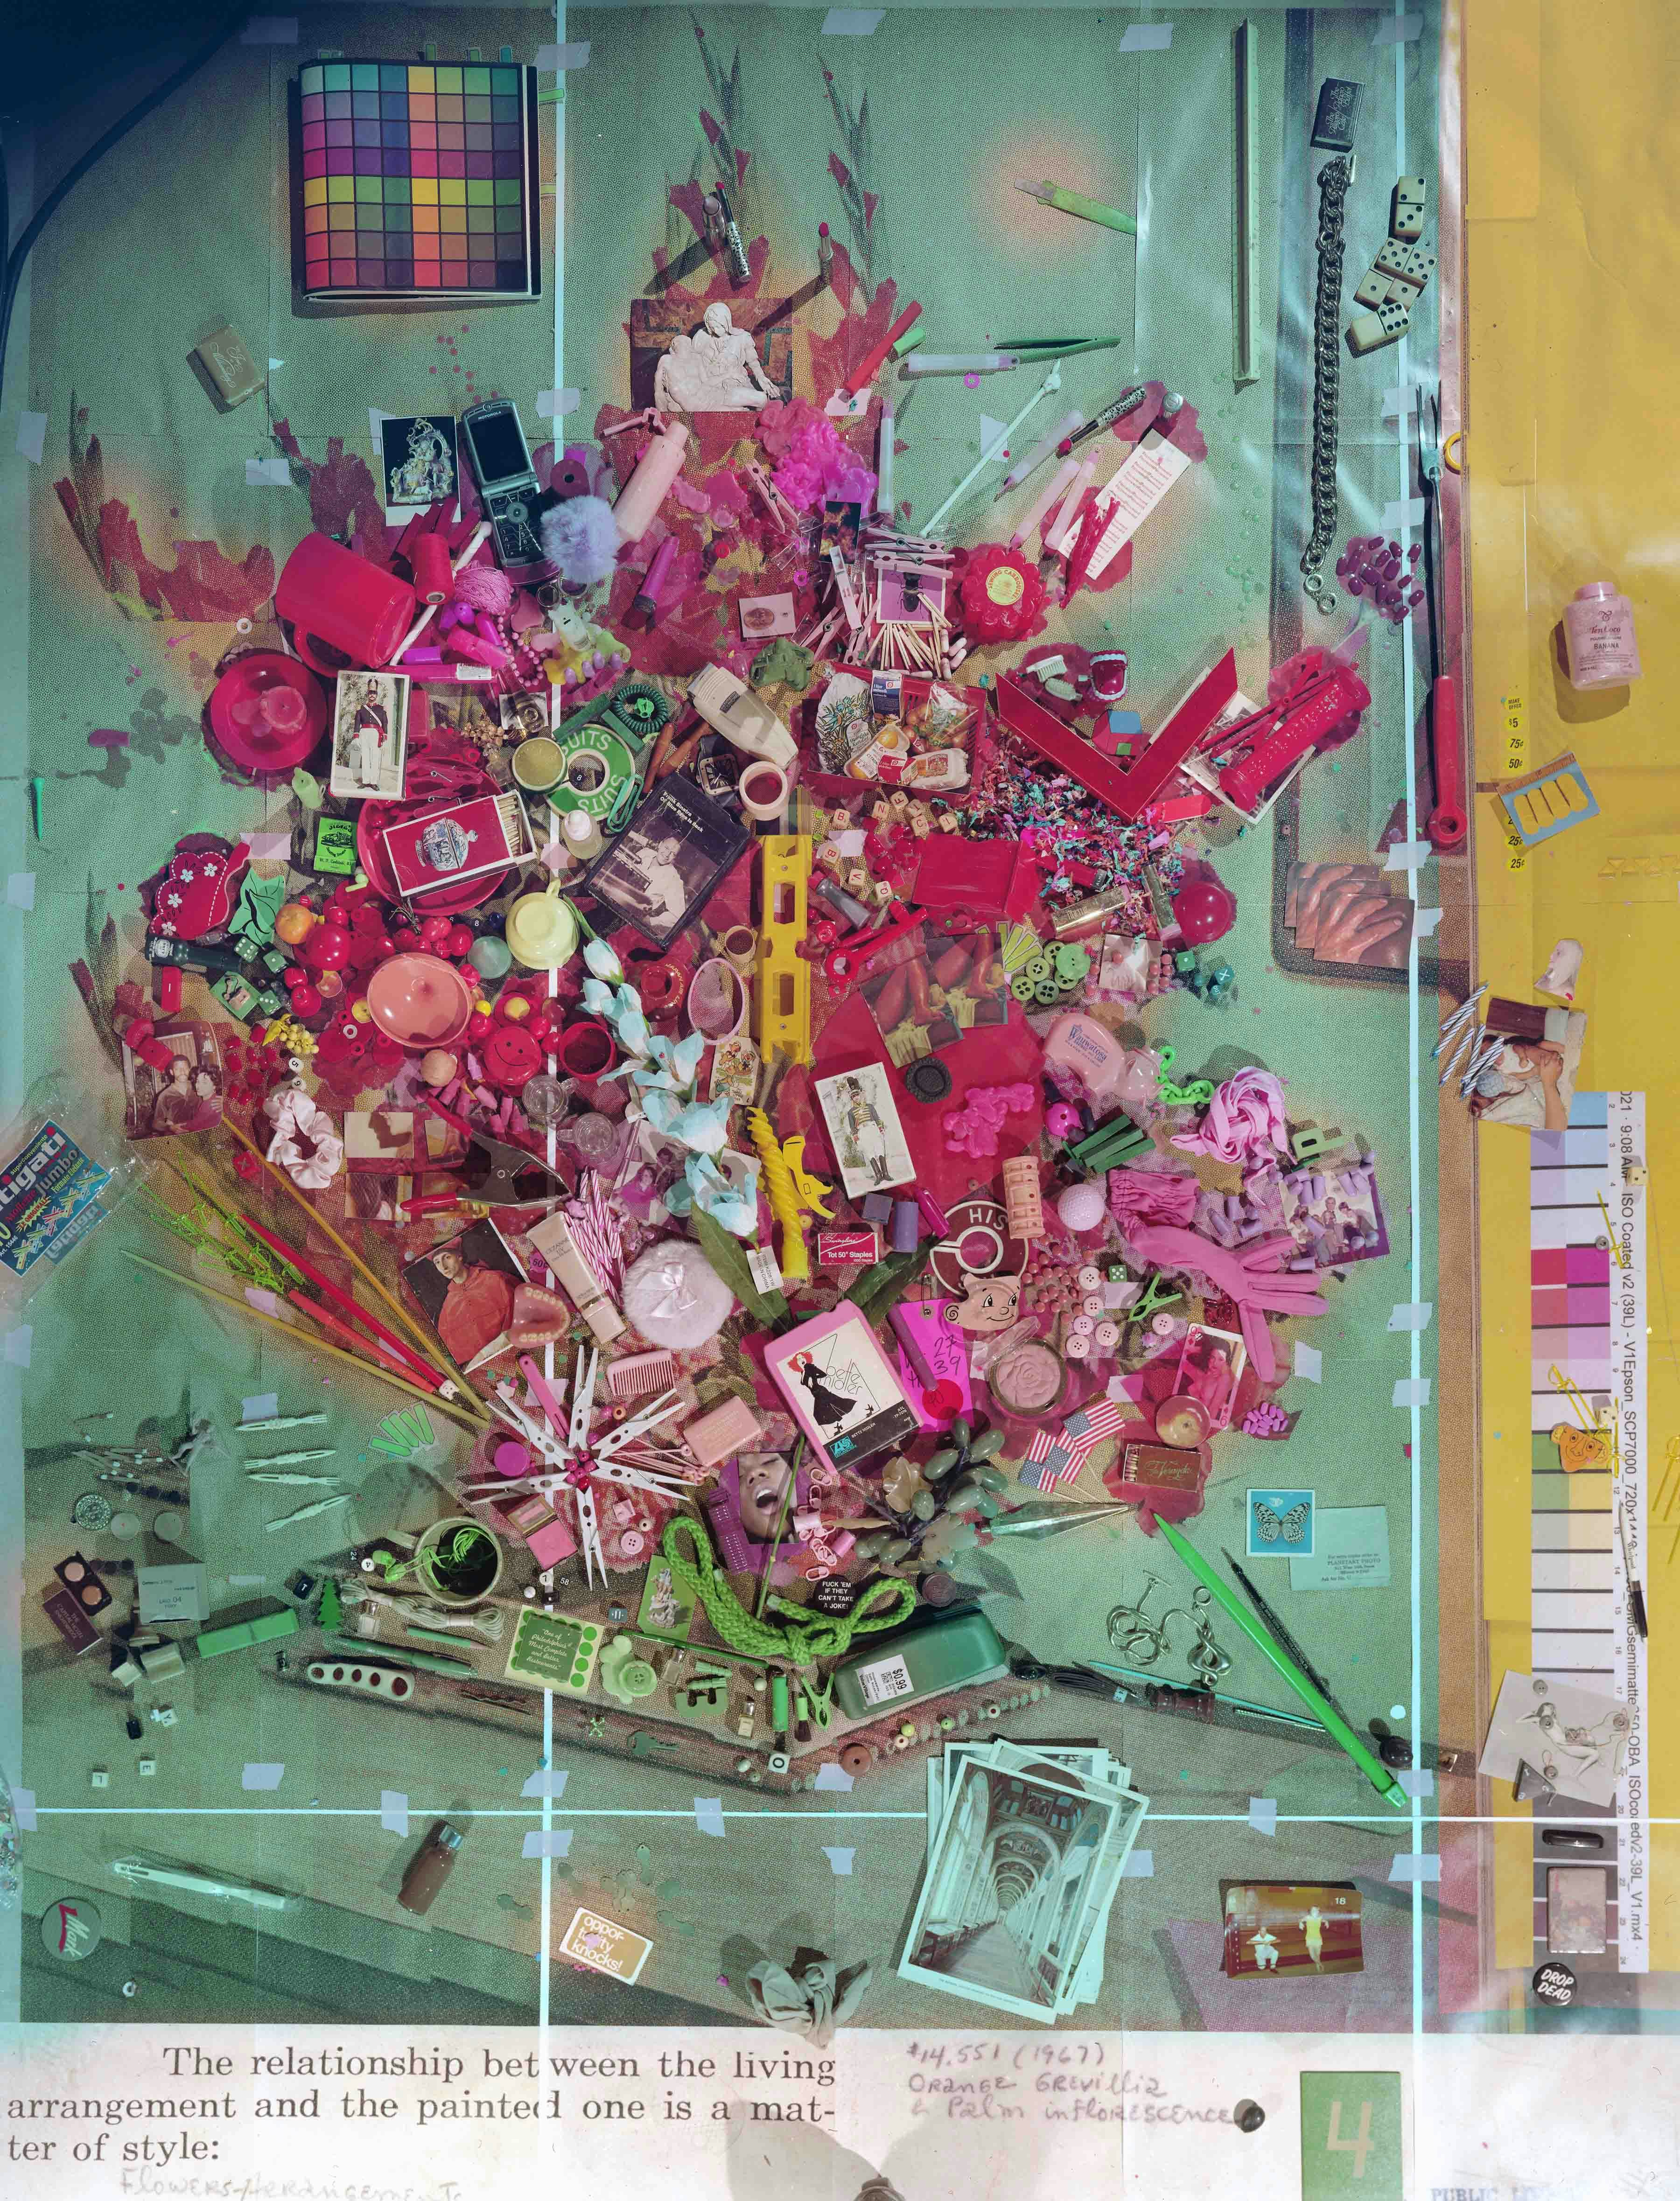 A collage type of work forming a flower arrangement, but is made from collected pink looking objects from the house.